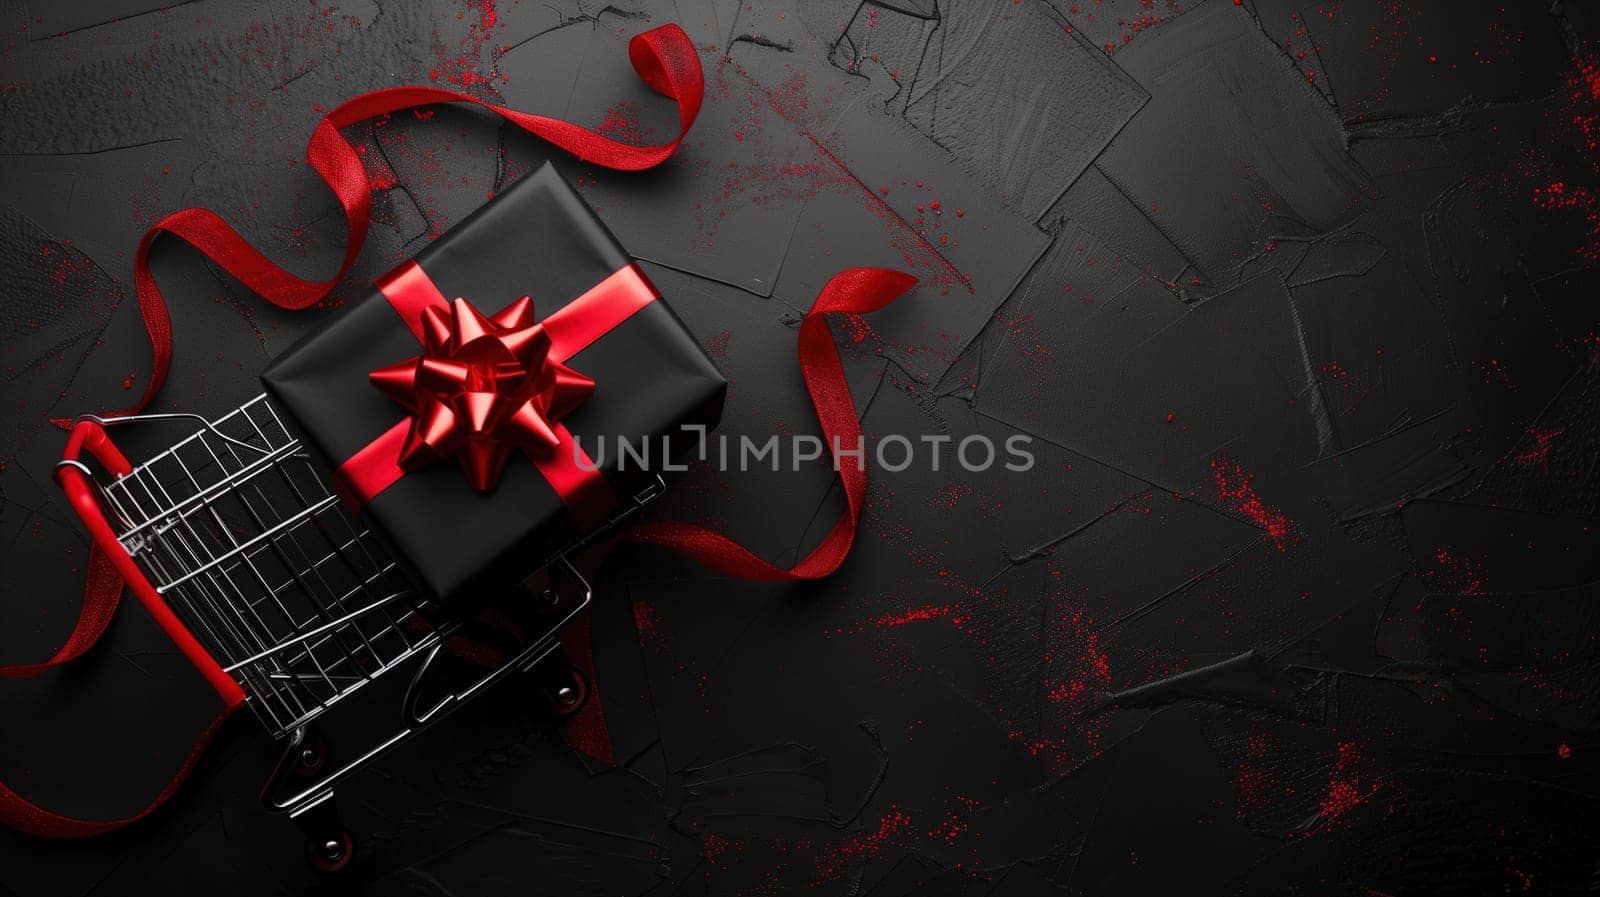 A shopping cart, typically used for shopping, is wrapped with a bright red ribbon. The image conveys a festive and celebratory atmosphere, hinting at a sale or a special event like Black Friday.